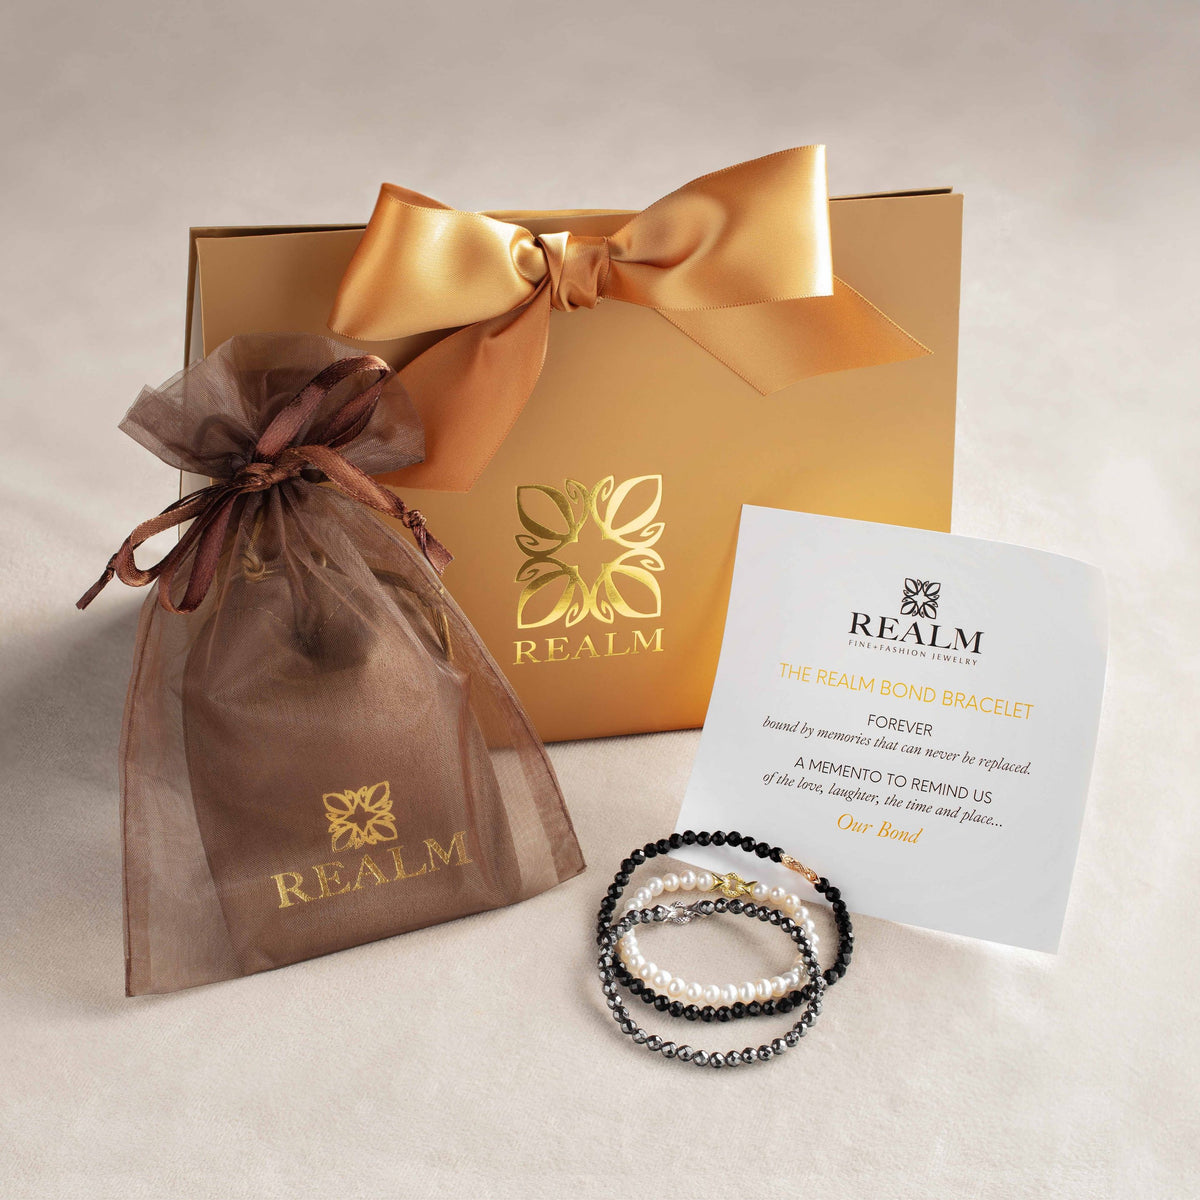 Trio of REALM Bond Bracelets with luxe gift packaging and special memento card